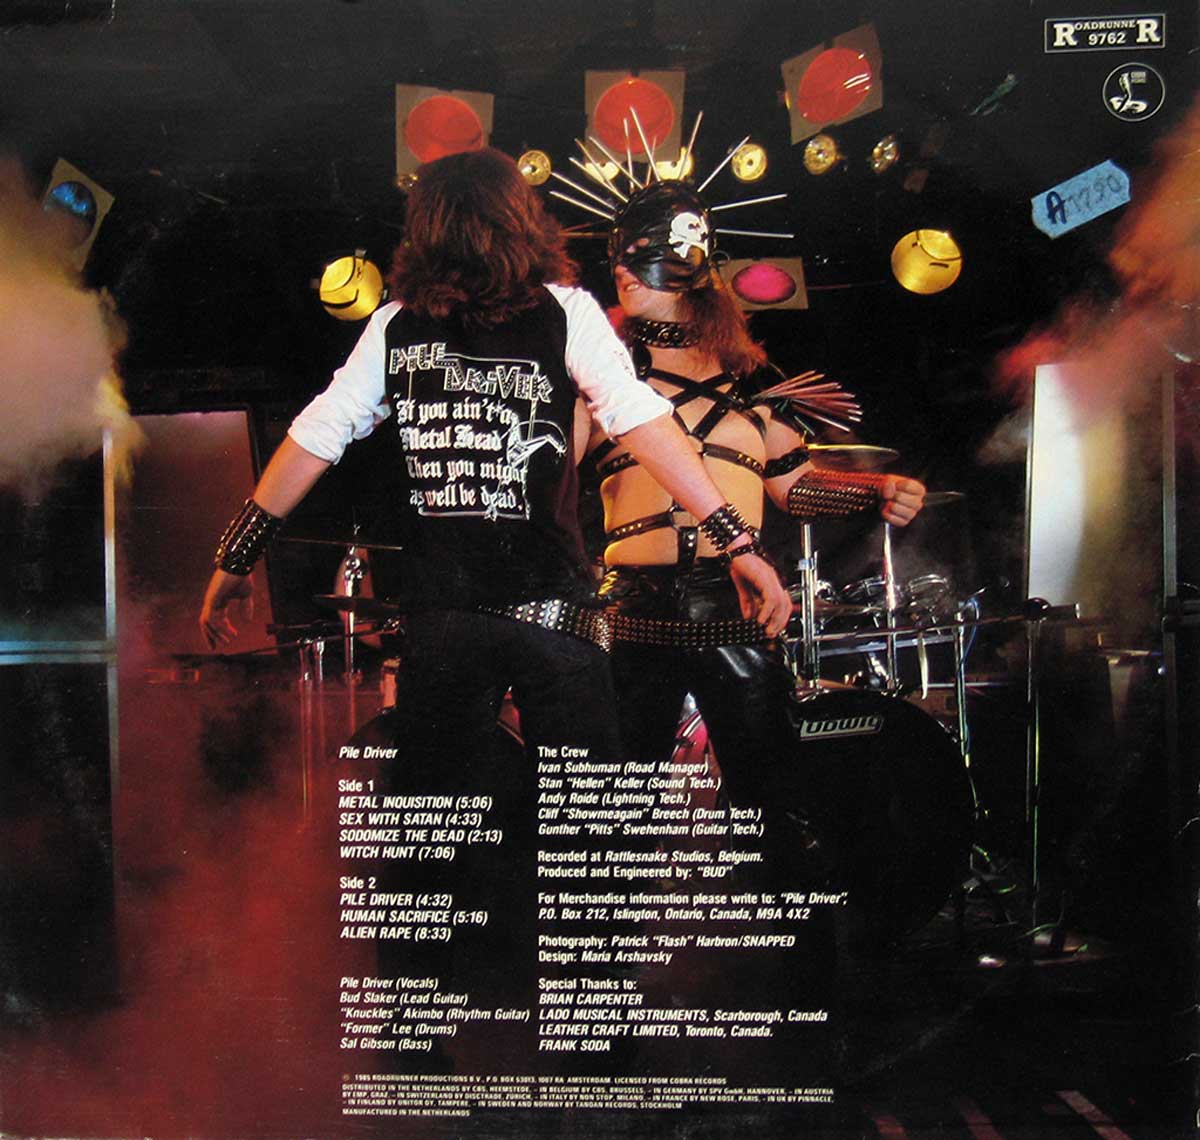 High Resolution Photo Album Back Cover of PILEDRiVER - Metal Inquisition https://vinyl-records.nl